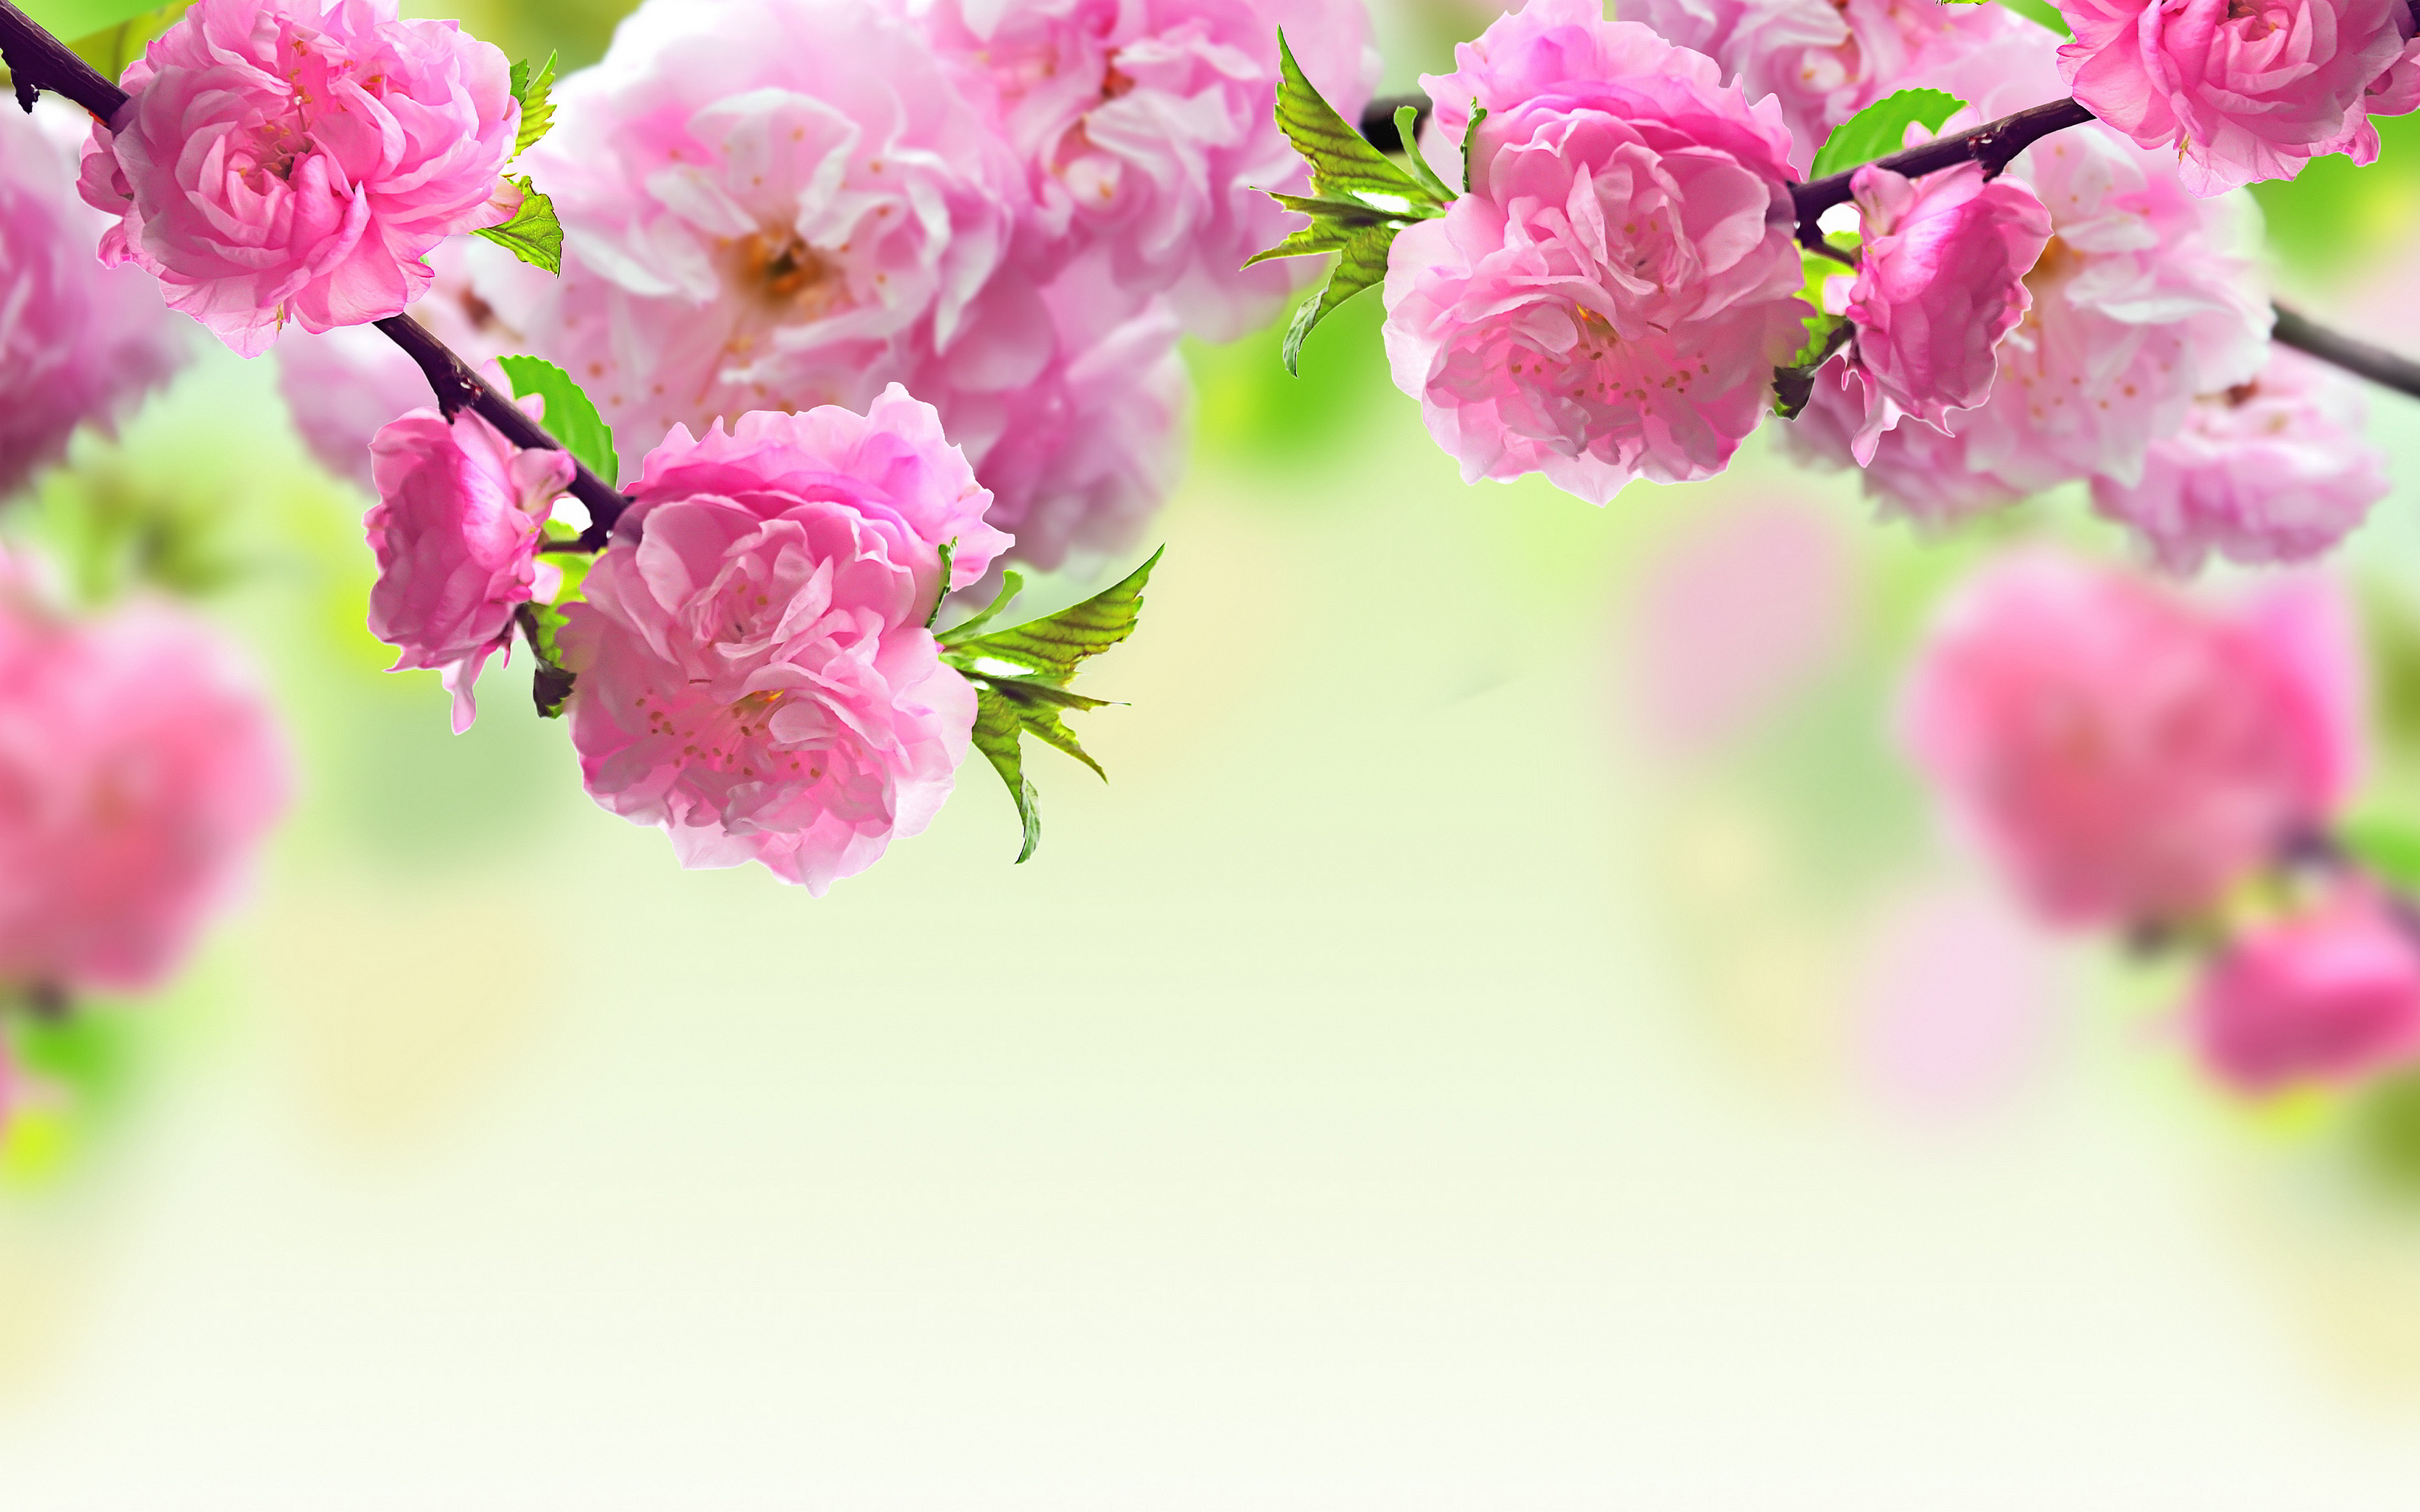 High Definition Flower Wallpapers